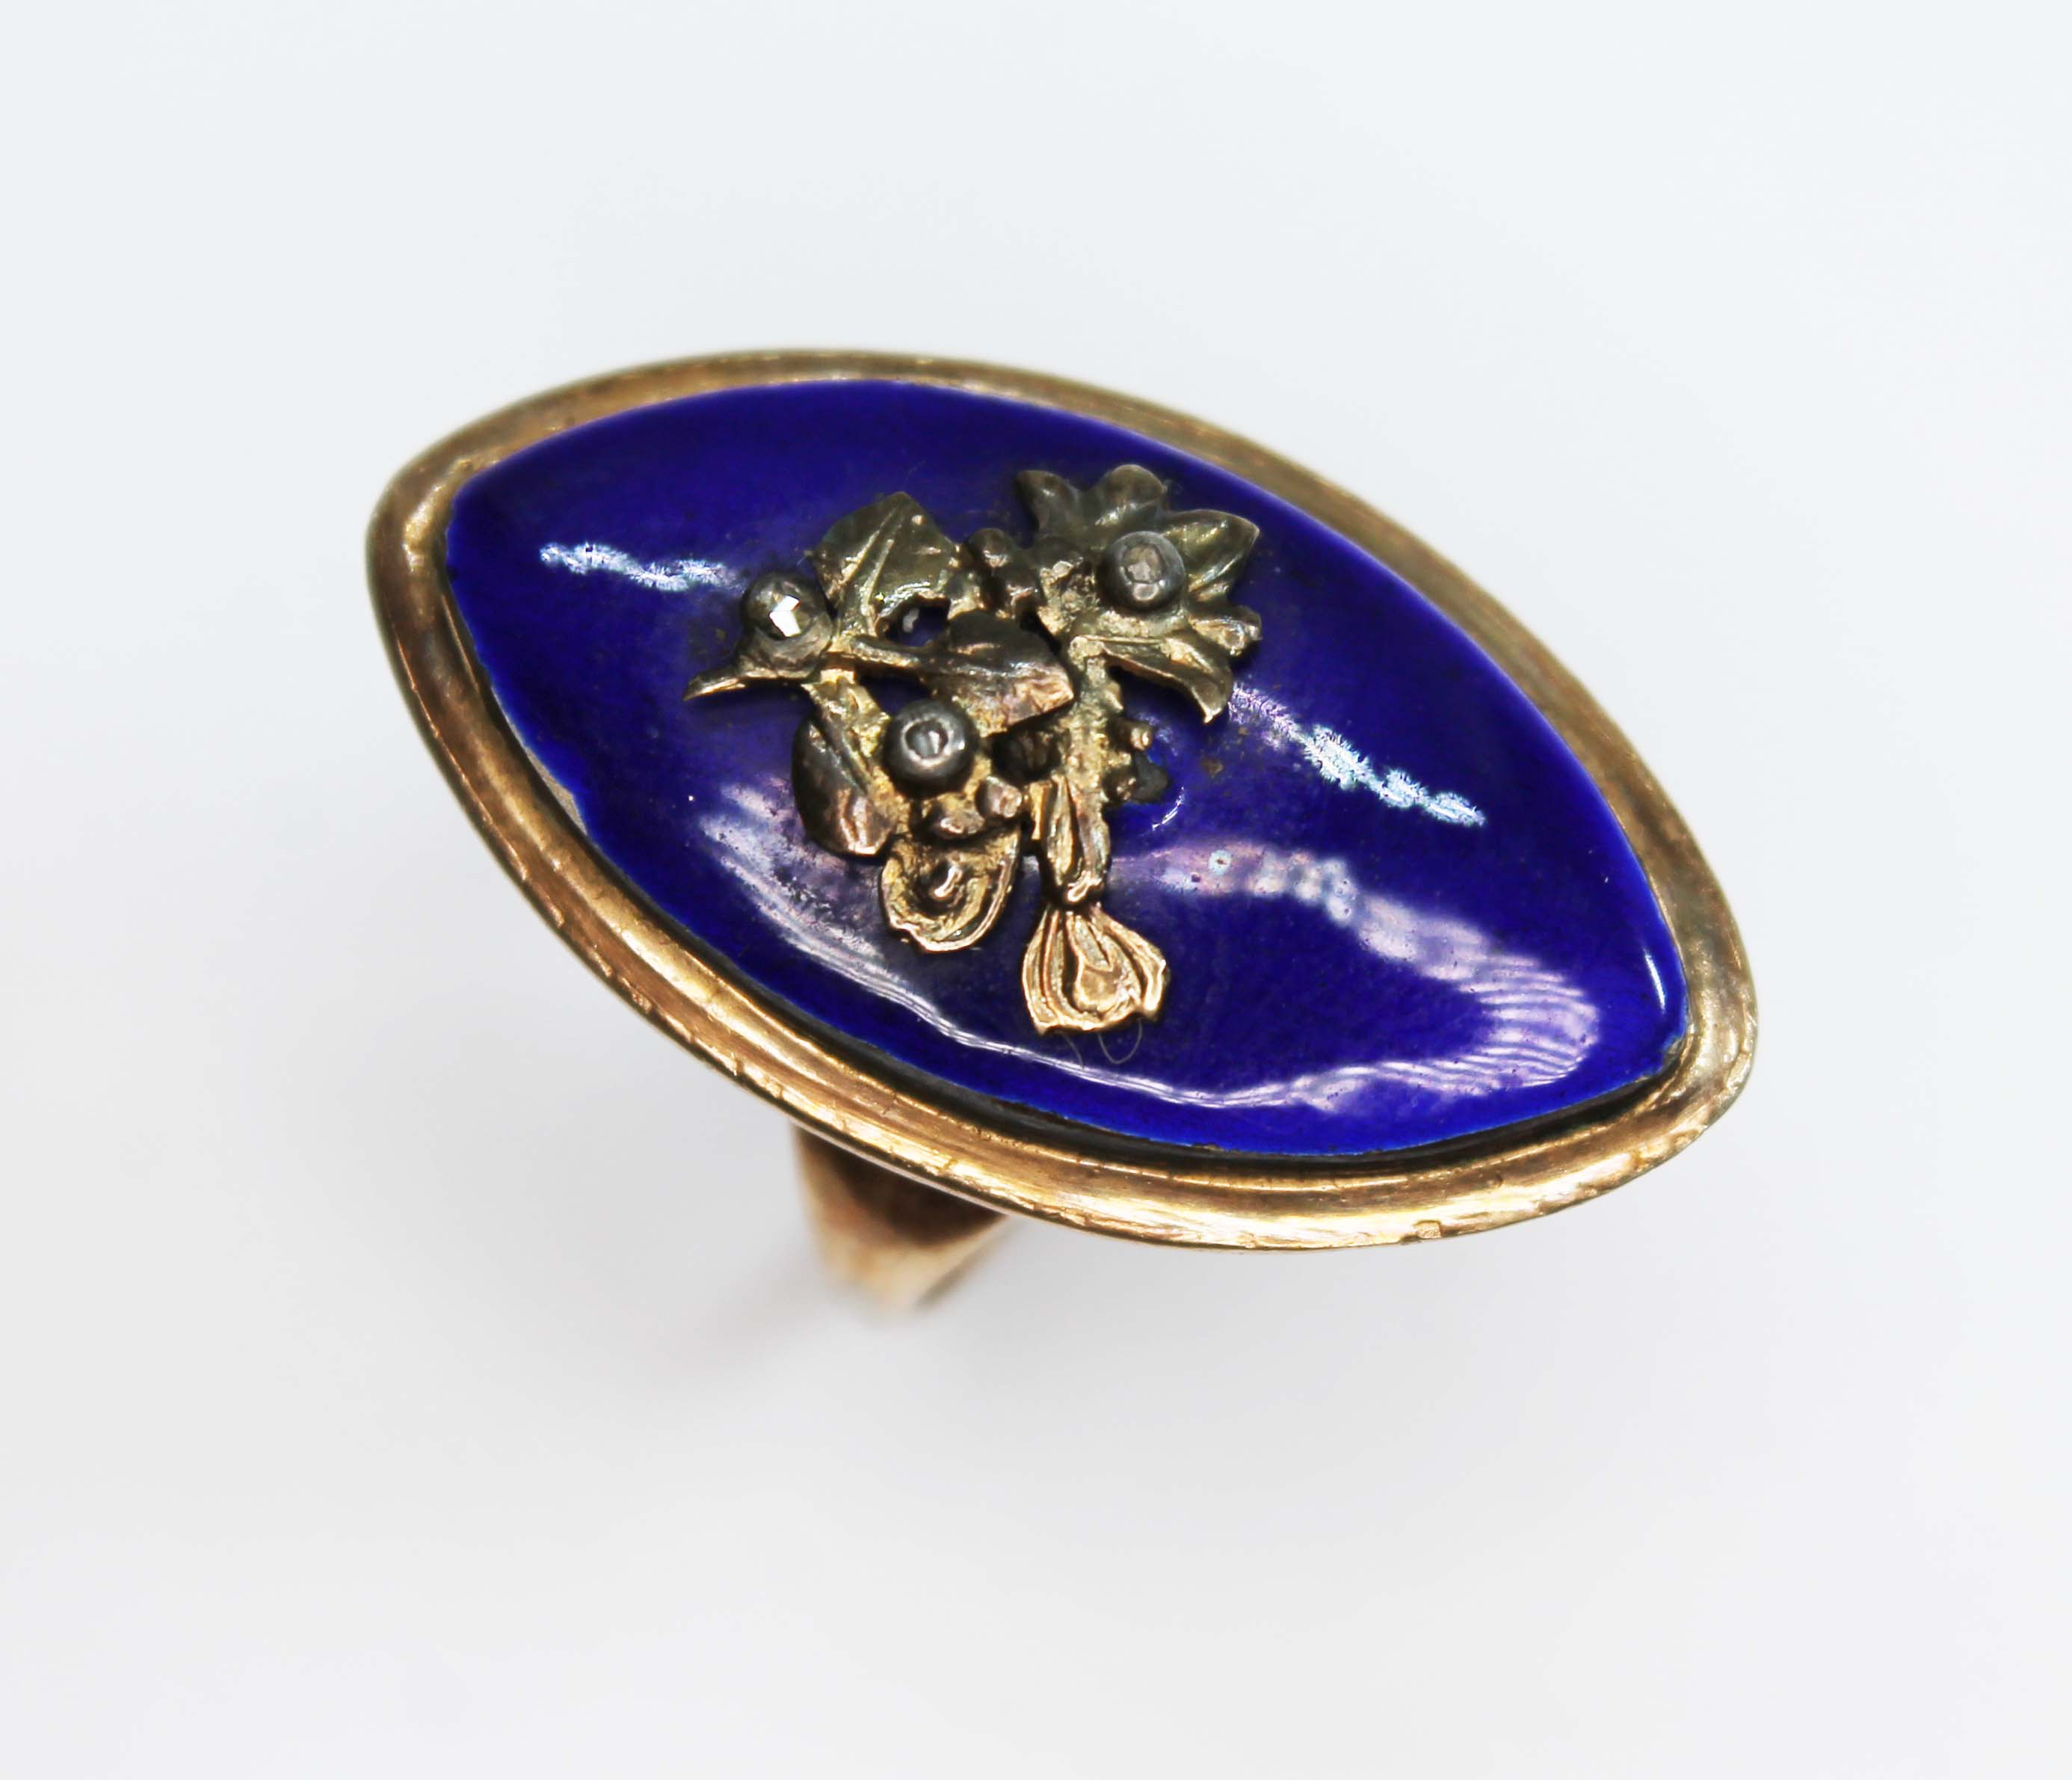 A late Georgian blue enamel and diamond navette shaped mourning ring, the blue enamel applied with a